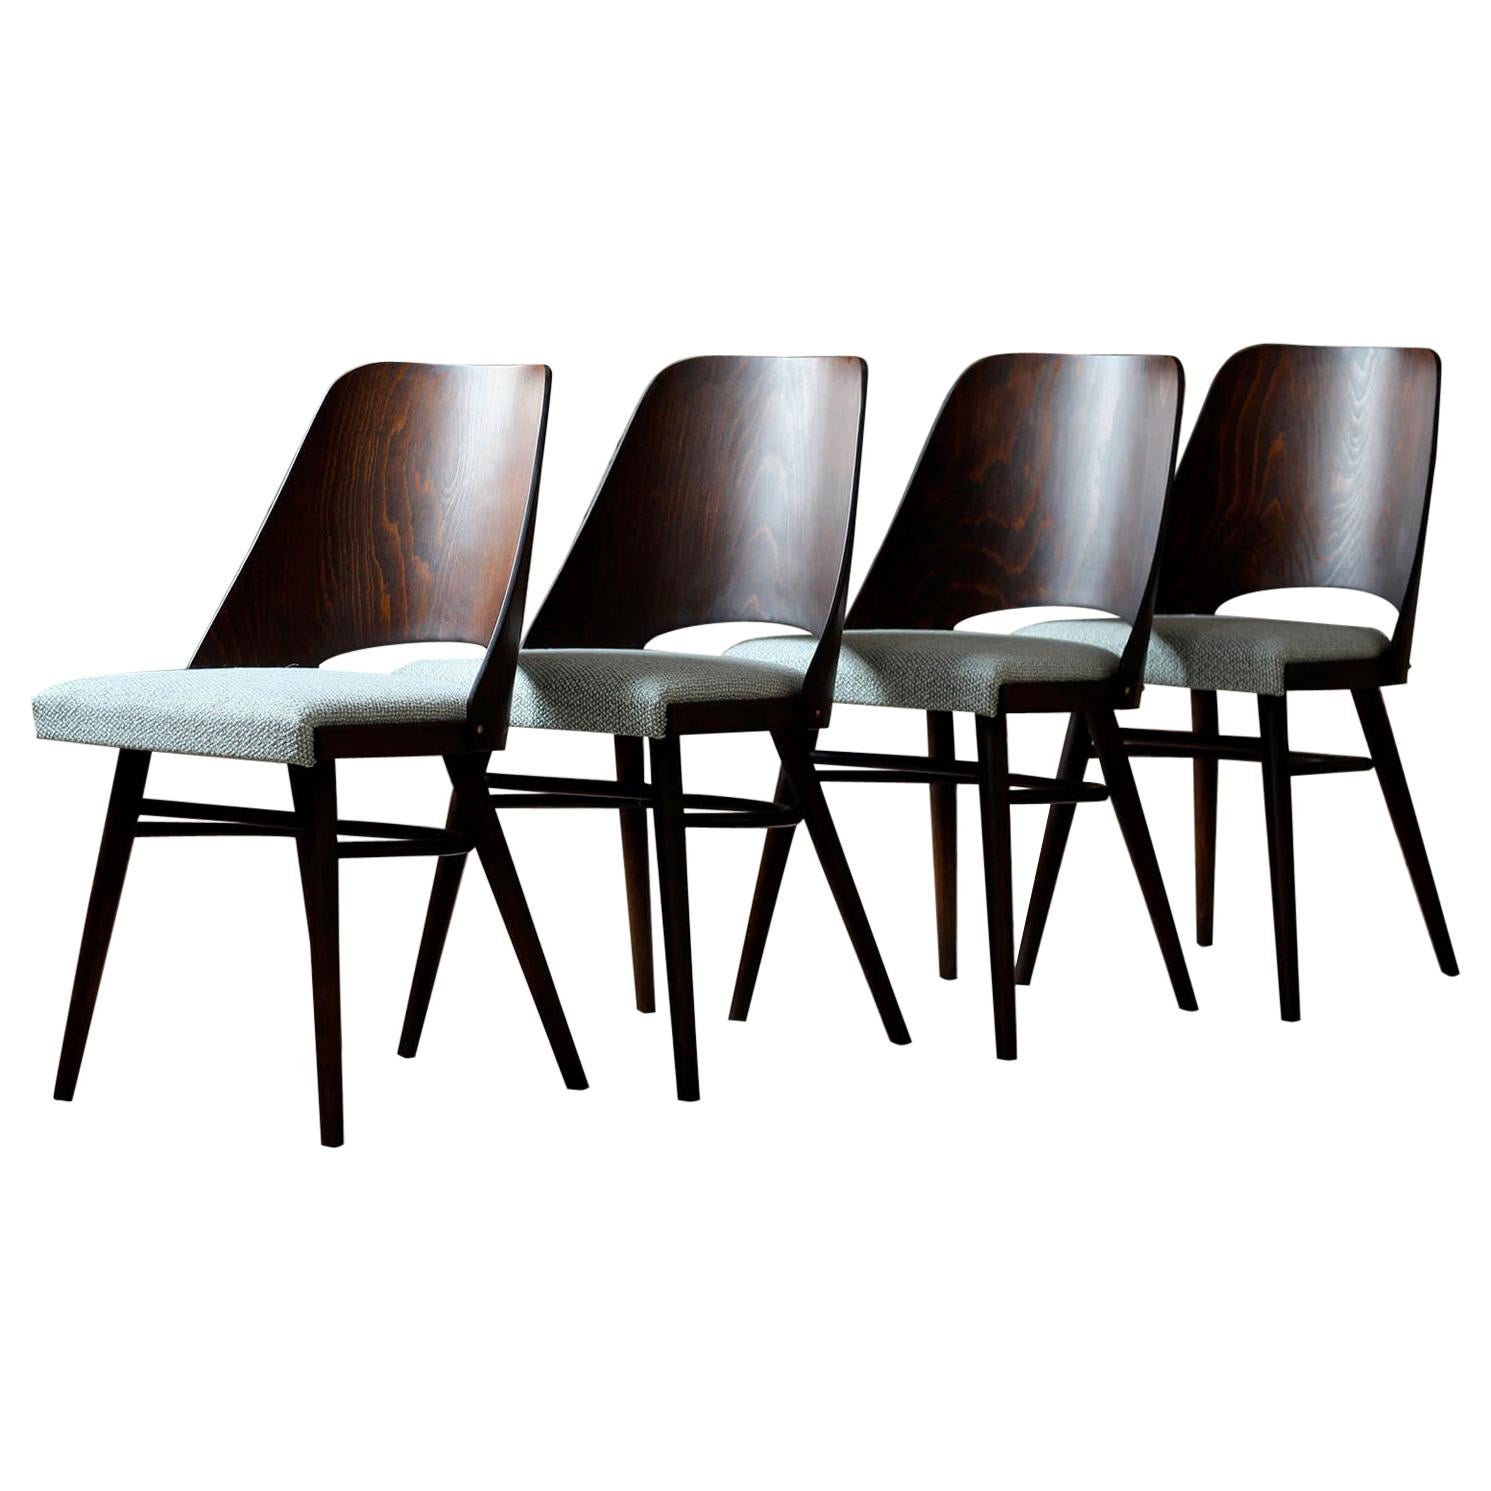 Set of 4 Dining Chairs by R. Hofman for Ton, Model 514, New Sahco Upholstery